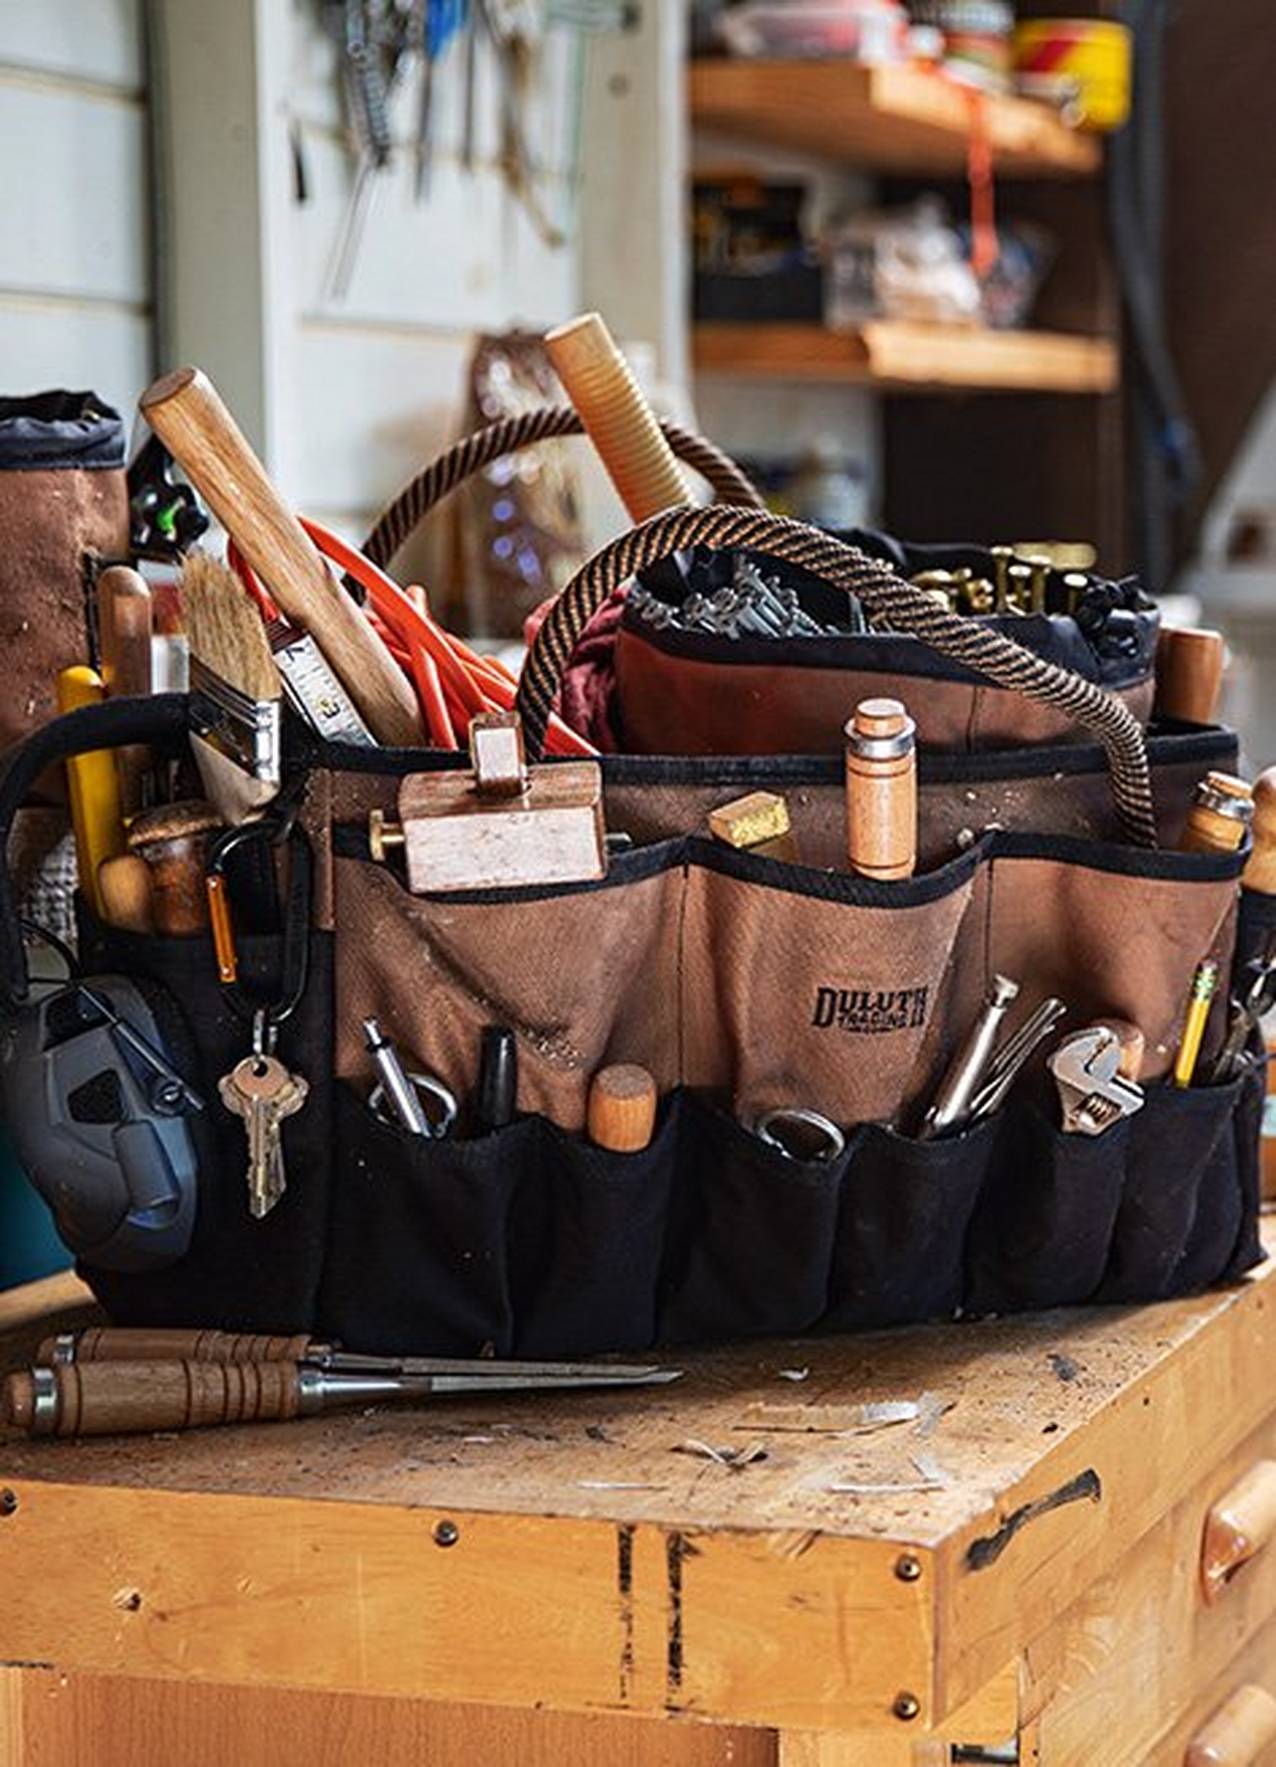 A fire hose toolbag sits in a workshop with it's pockets full of tools.